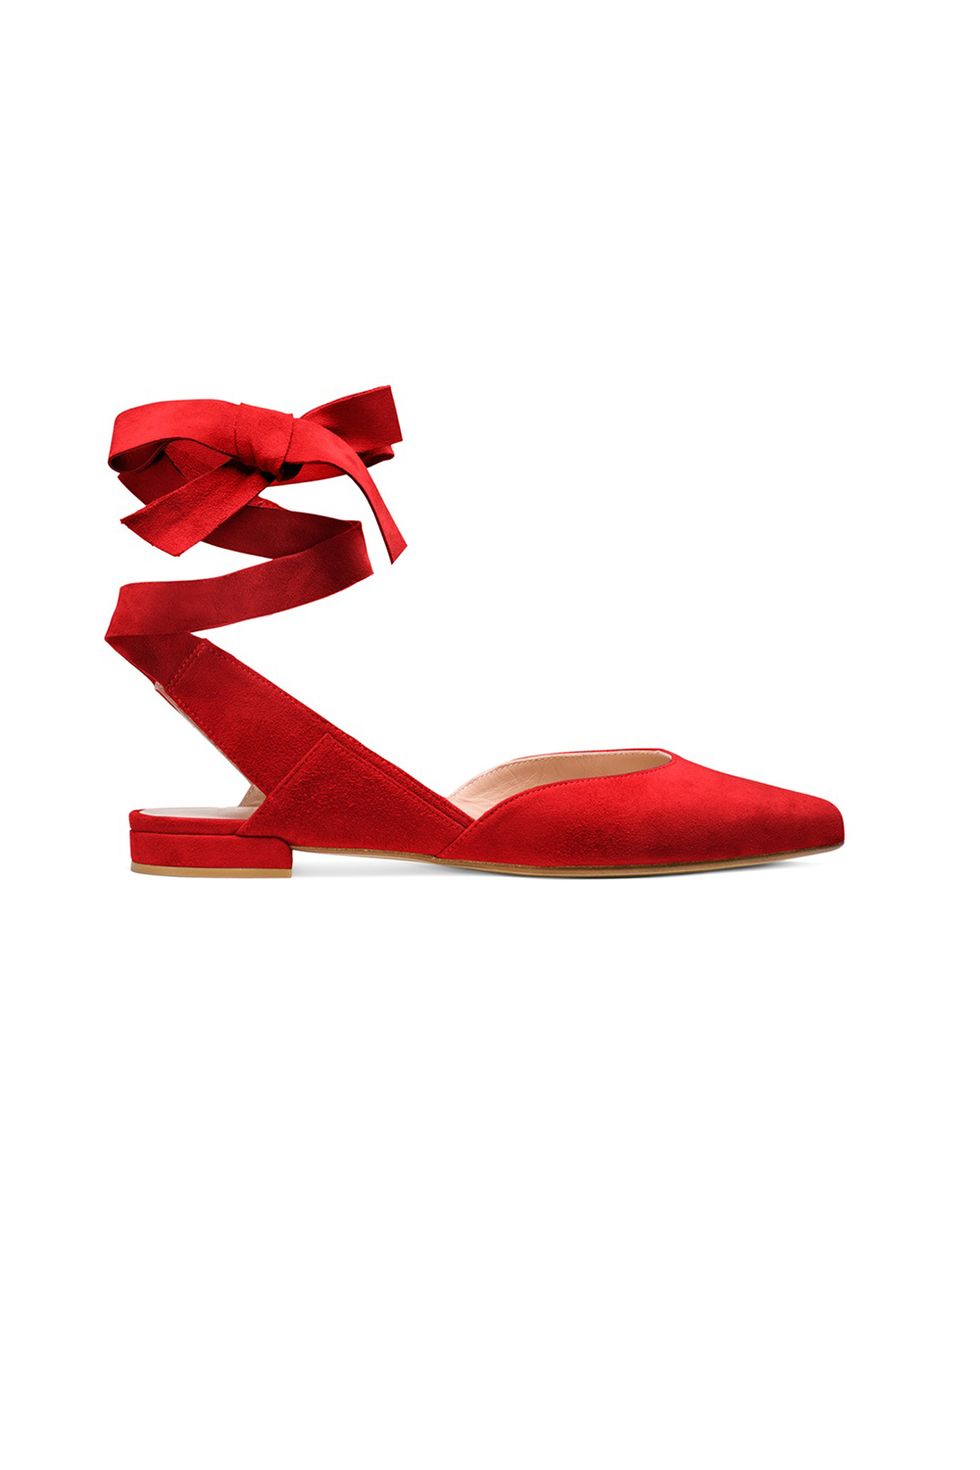 <p>A ballet-style lace up that will keep these va-va-voom&nbsp;sling-backs securely on your feet.&nbsp;</p><p><strong data-redactor-tag="strong" data-verified="redactor">The Supersonic Flat, $398; <a href="http://www.stuartweitzman.com/products/supersonic/?DepartmentId=160&amp;DepartmentGroupId=1&amp;ColMatID=30335" target="_blank" data-tracking-id="recirc-text-link">stuartweitzman.com</a>.</strong></p>